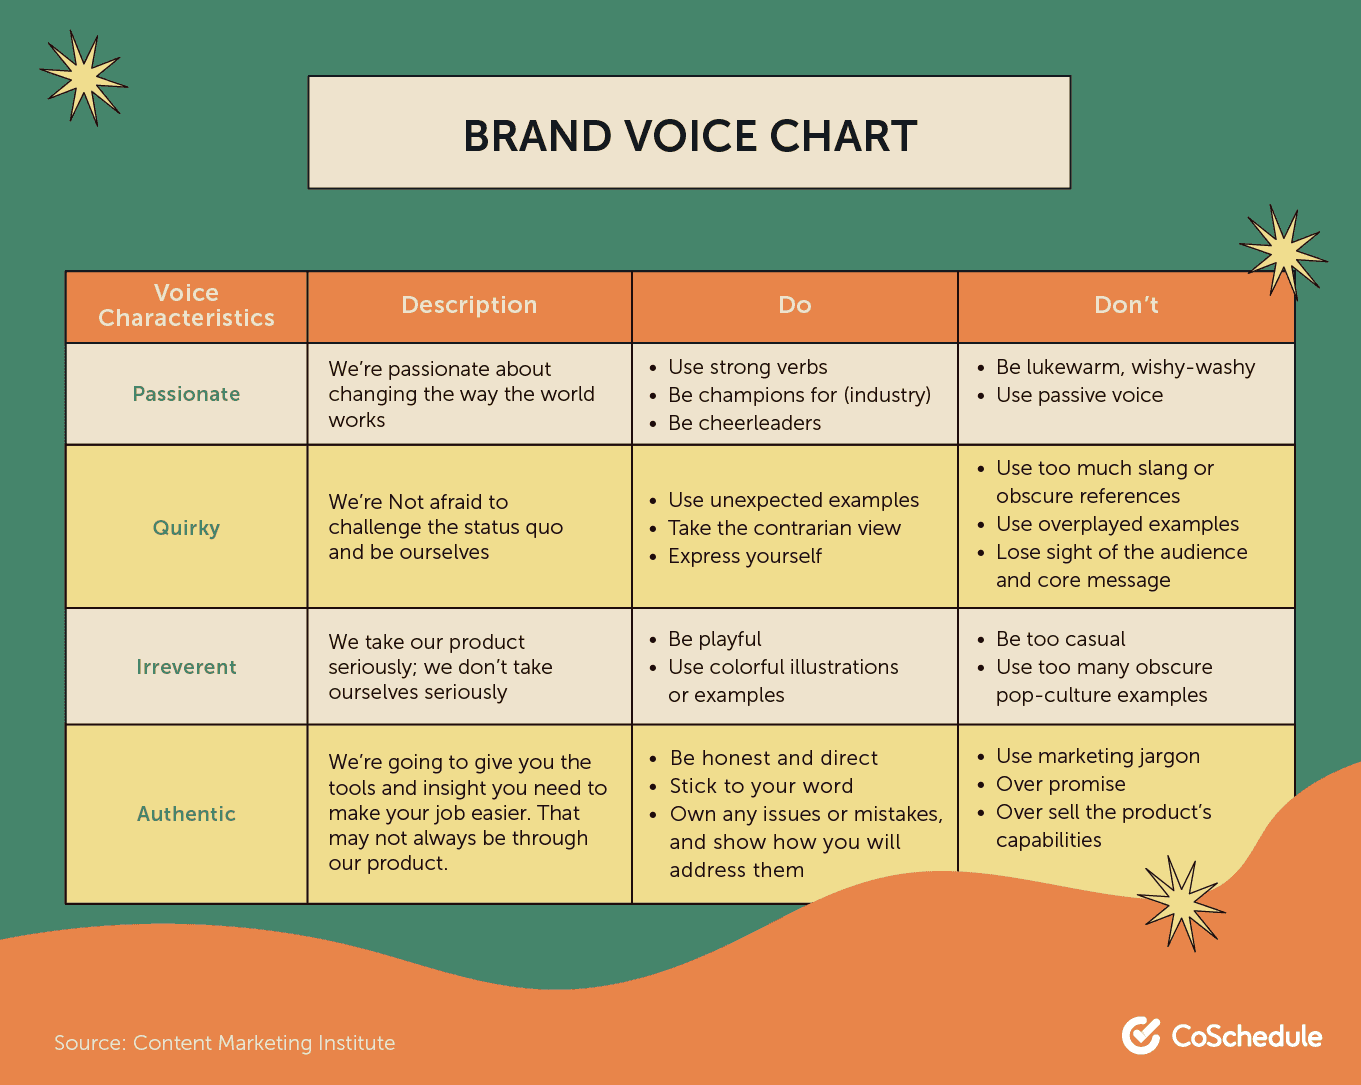 Defie and build your brand voice chart